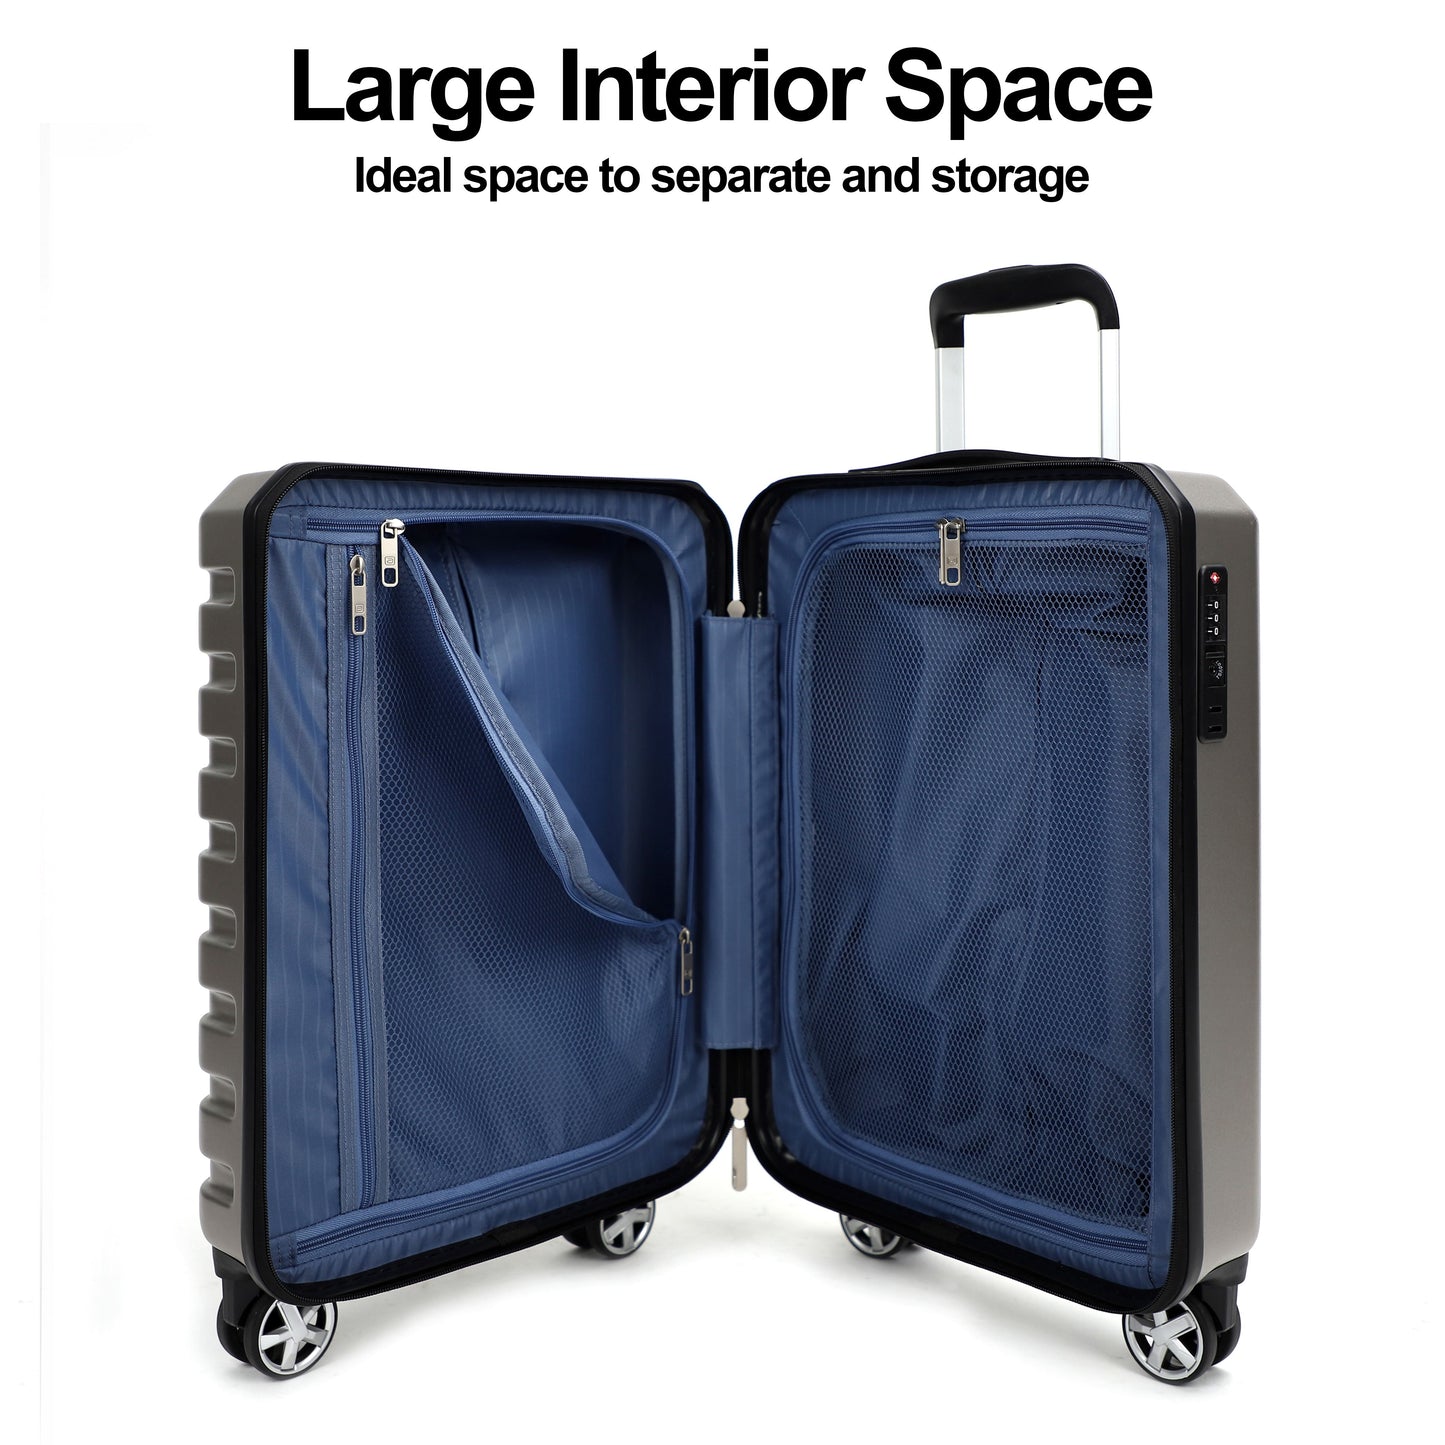 Airline_Carry_On_Luggage_iron_grey_expanded_viewT1978155101